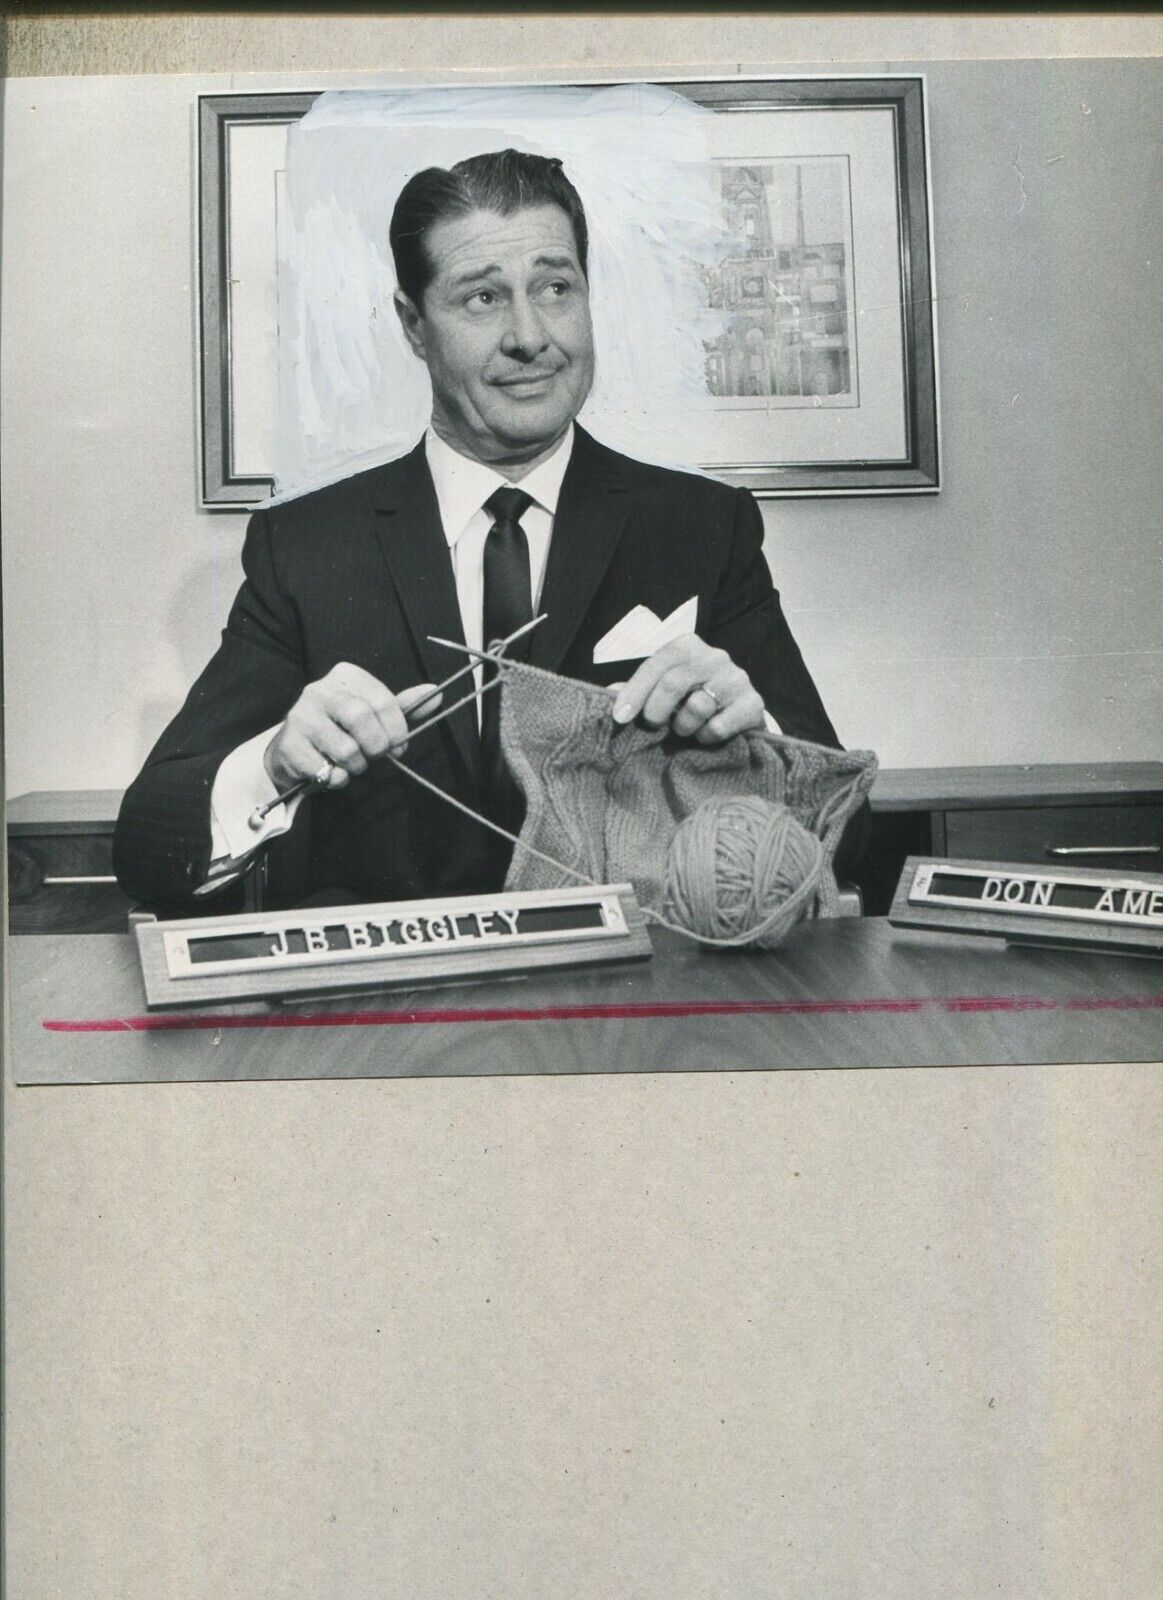 How To Succeed In Business Without Really Trying Don Ameche   VG press photo P2A